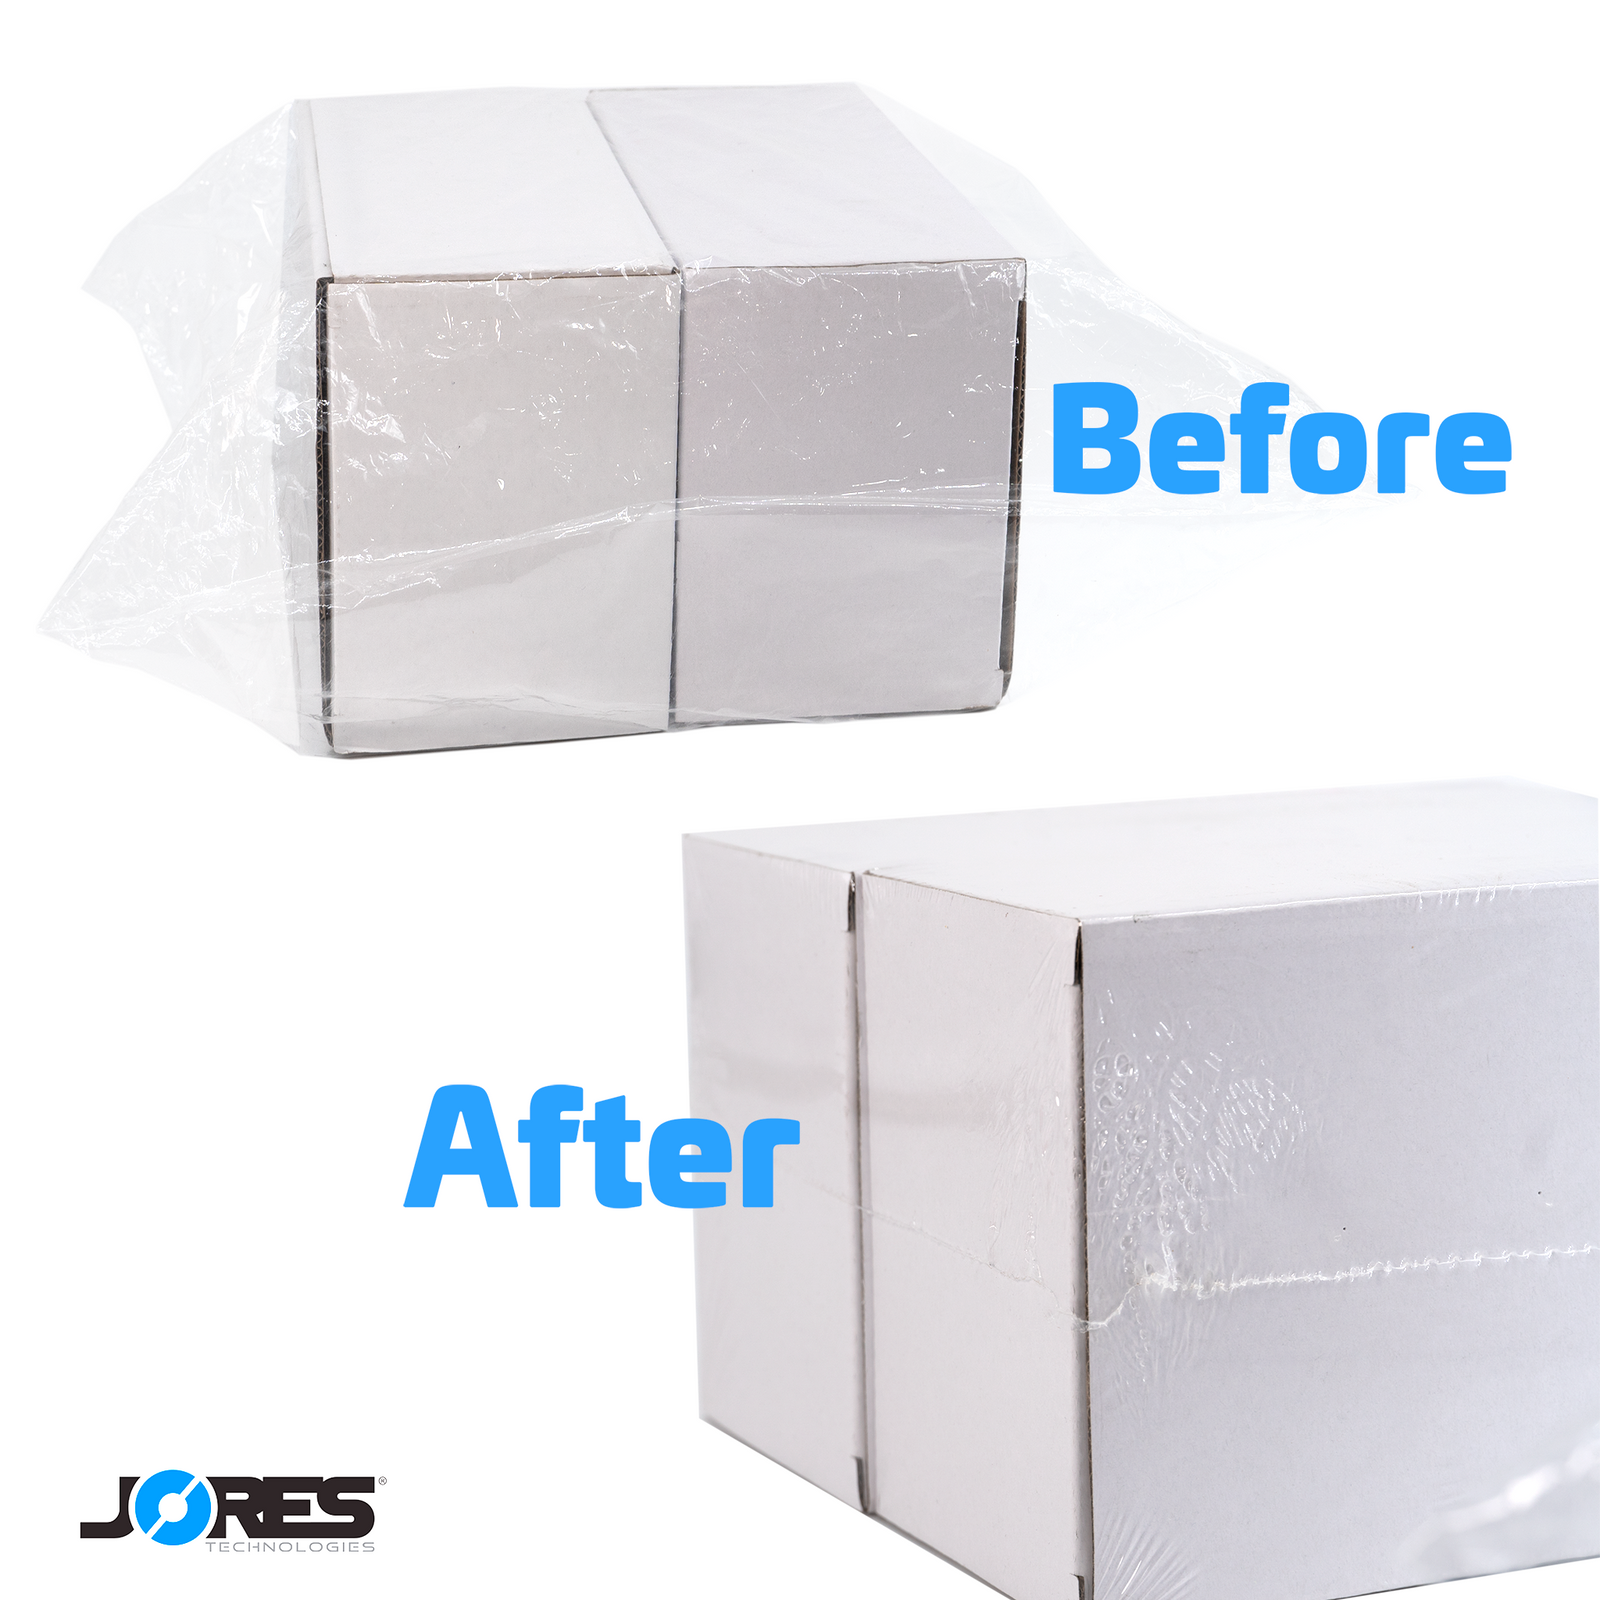 Appearance of a product before and after entering a  Shrink wrapping tunnel for packaging